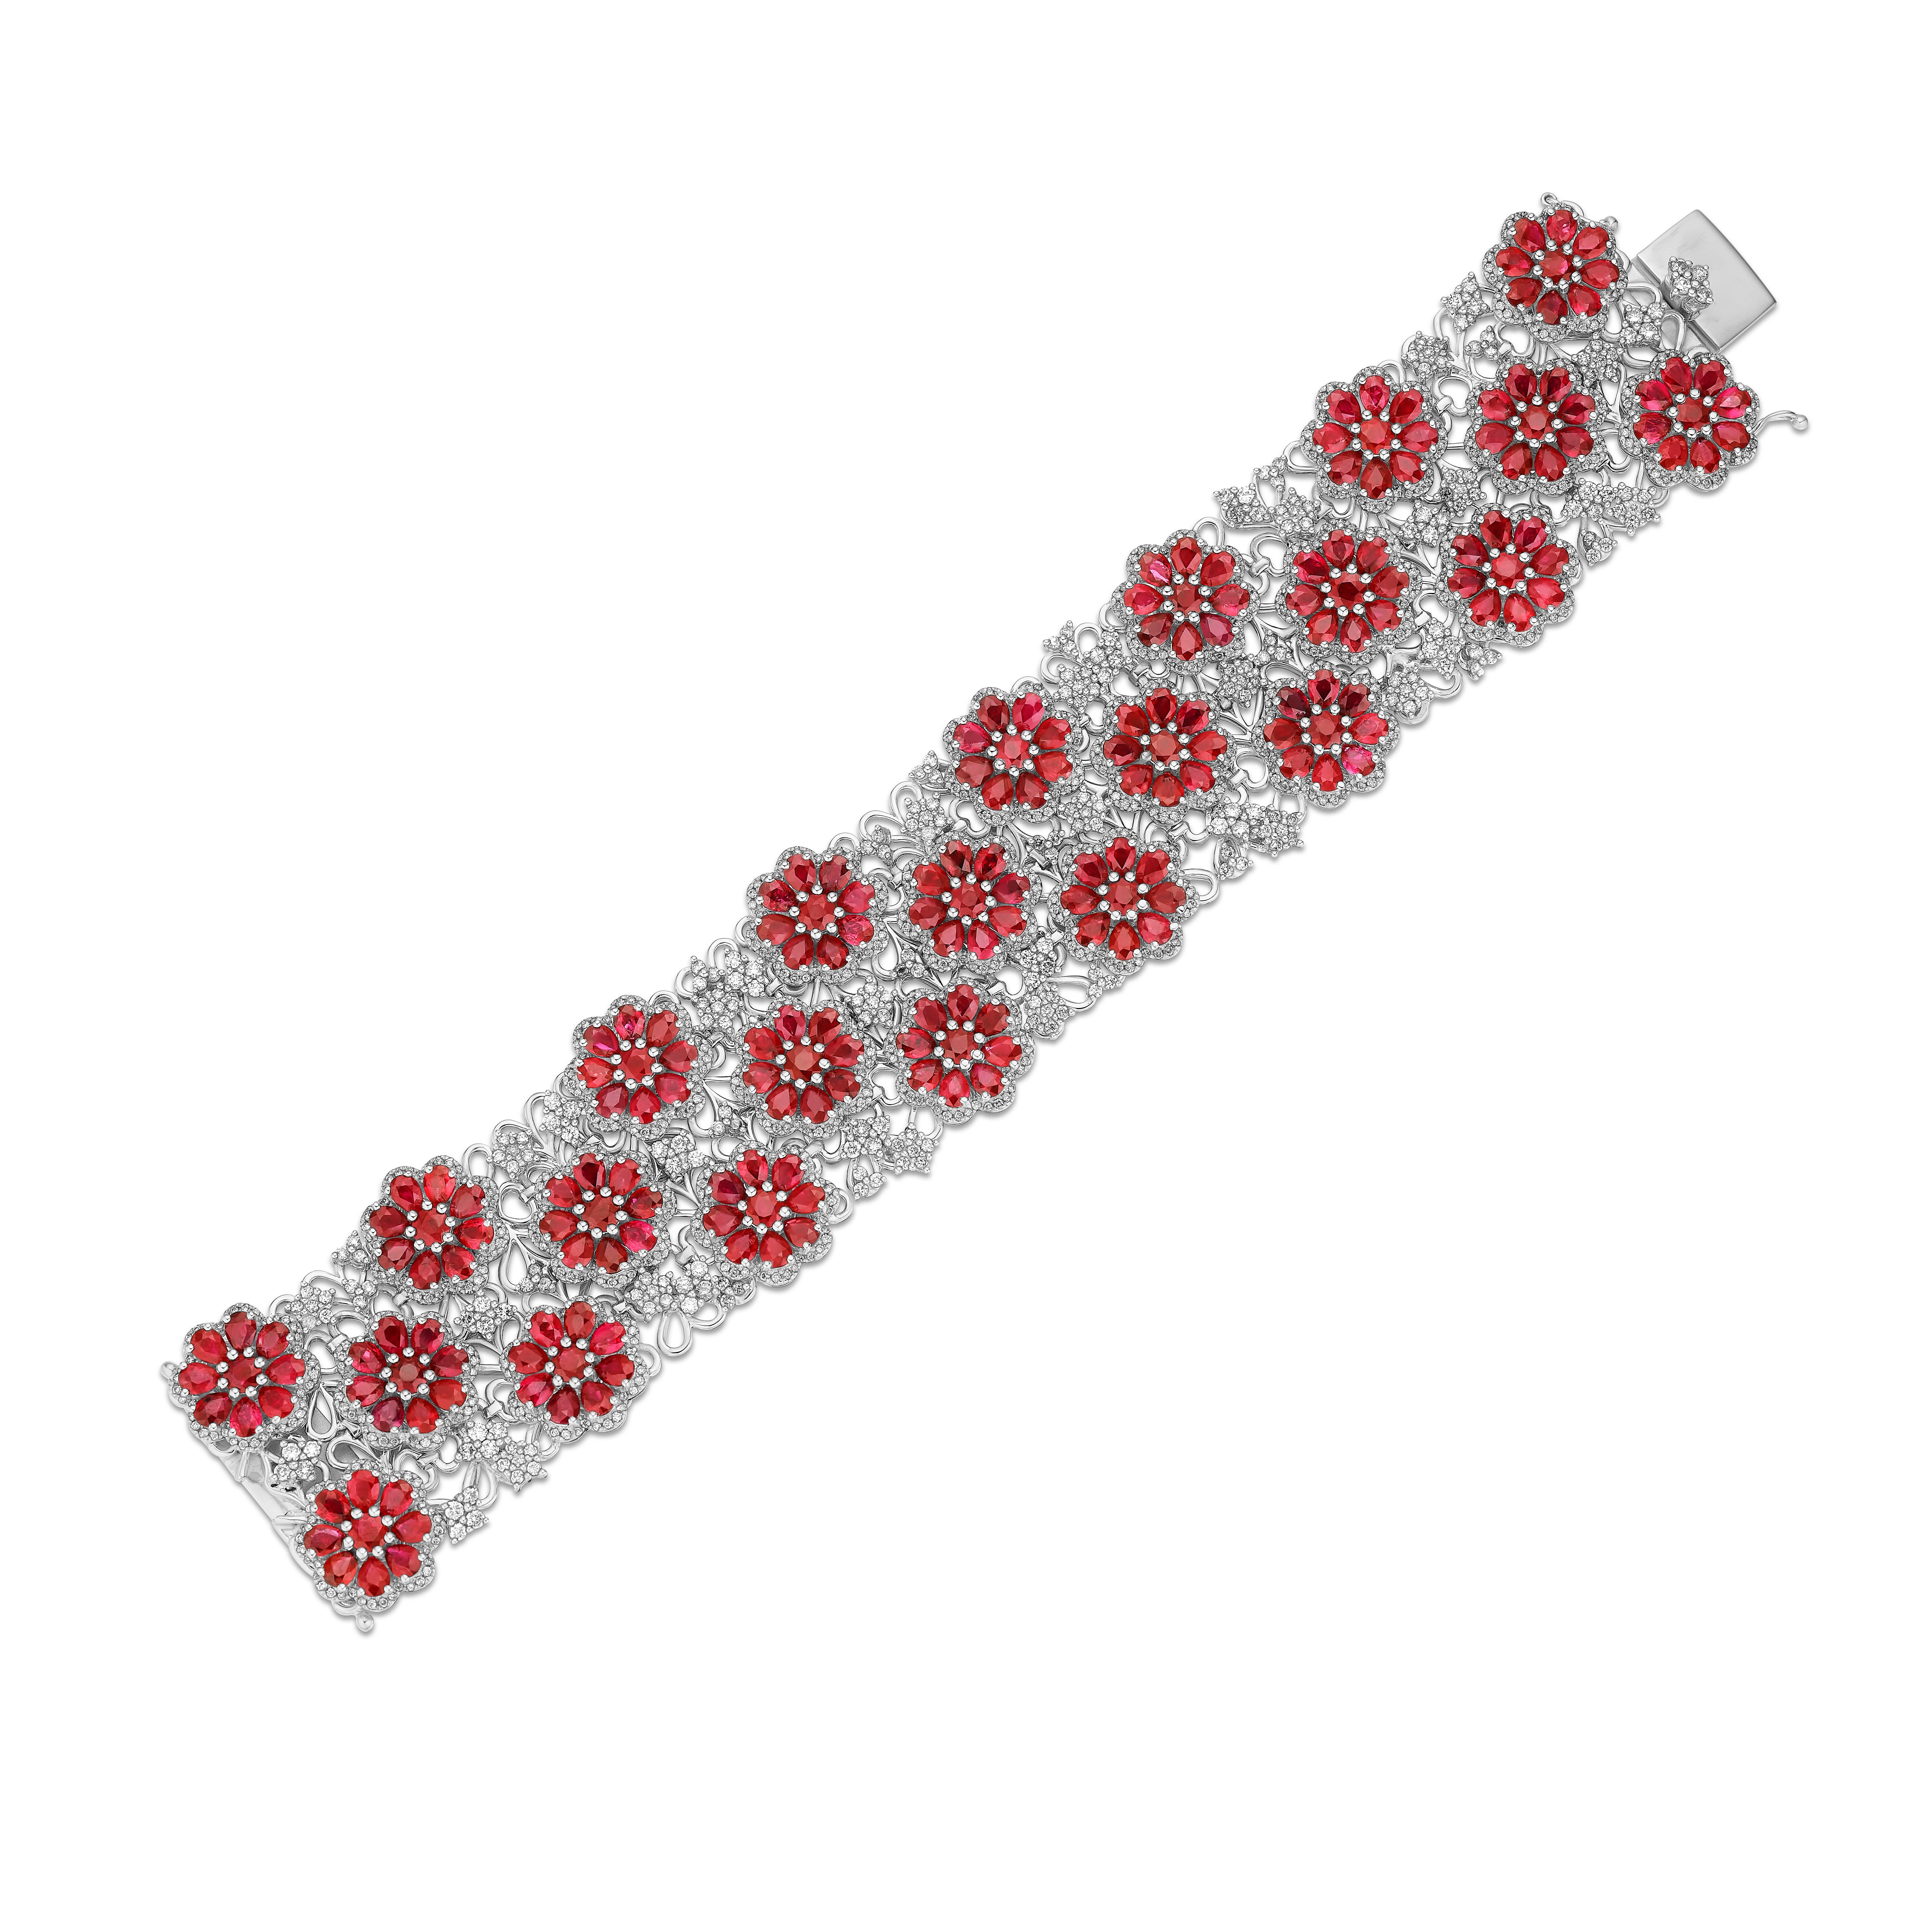 •	A truly exquisite combination of red rubies & white diamond encircles the wrist in this one-of-a-kind bracelet. Comprised with over 50 carats of rubies and diamonds, this bracelet was made to depict the elegance and beauty of nature and florals.